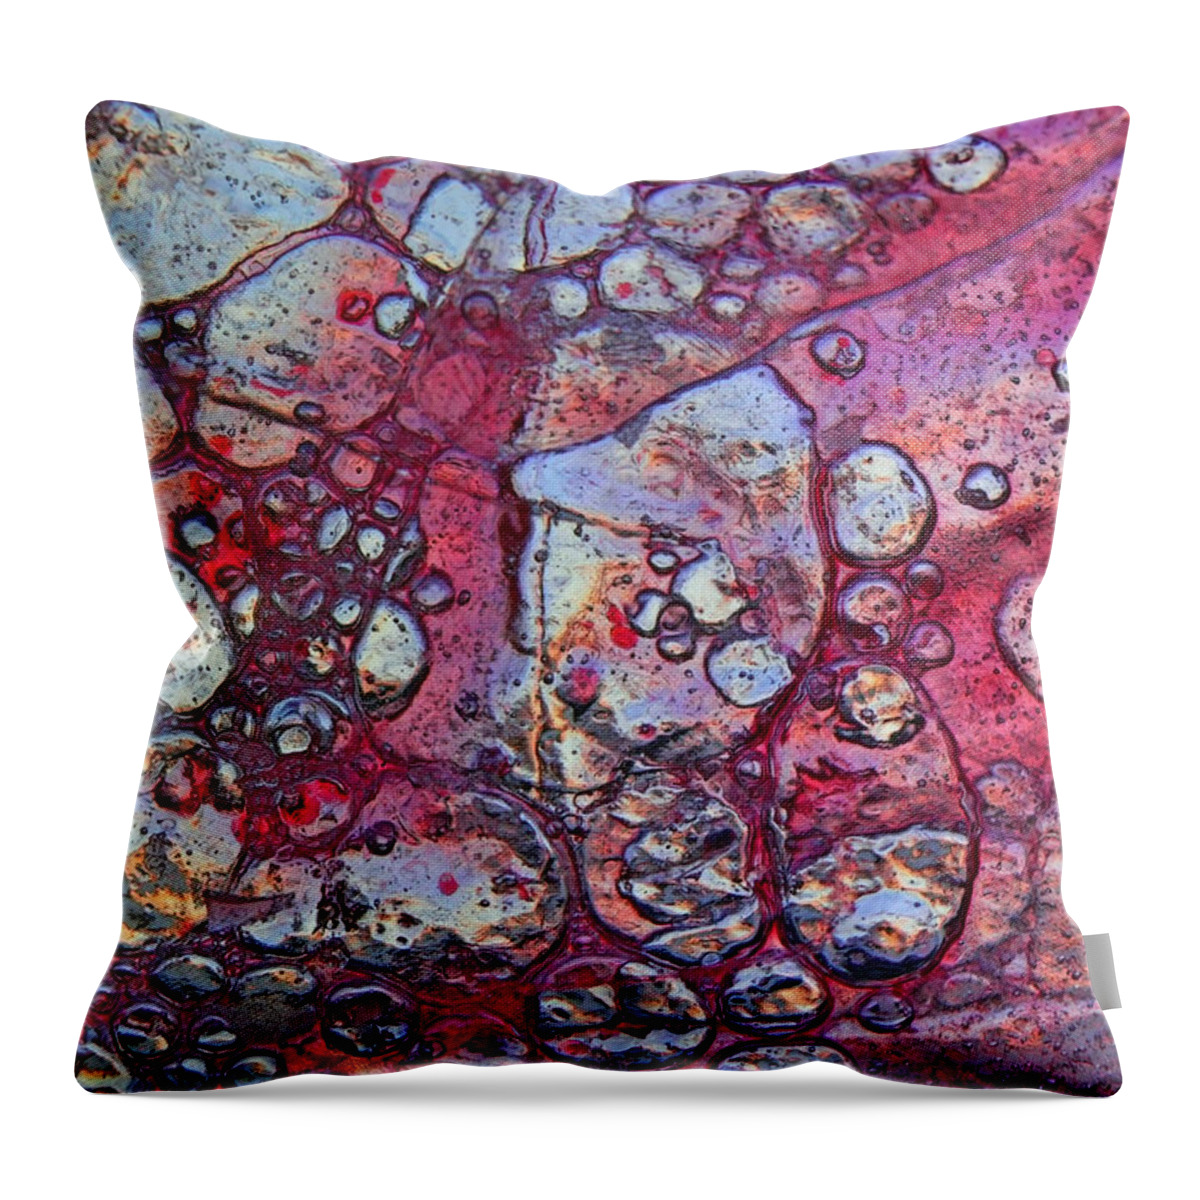 Ice Art Throw Pillow featuring the photograph Red Spot by Sami Tiainen